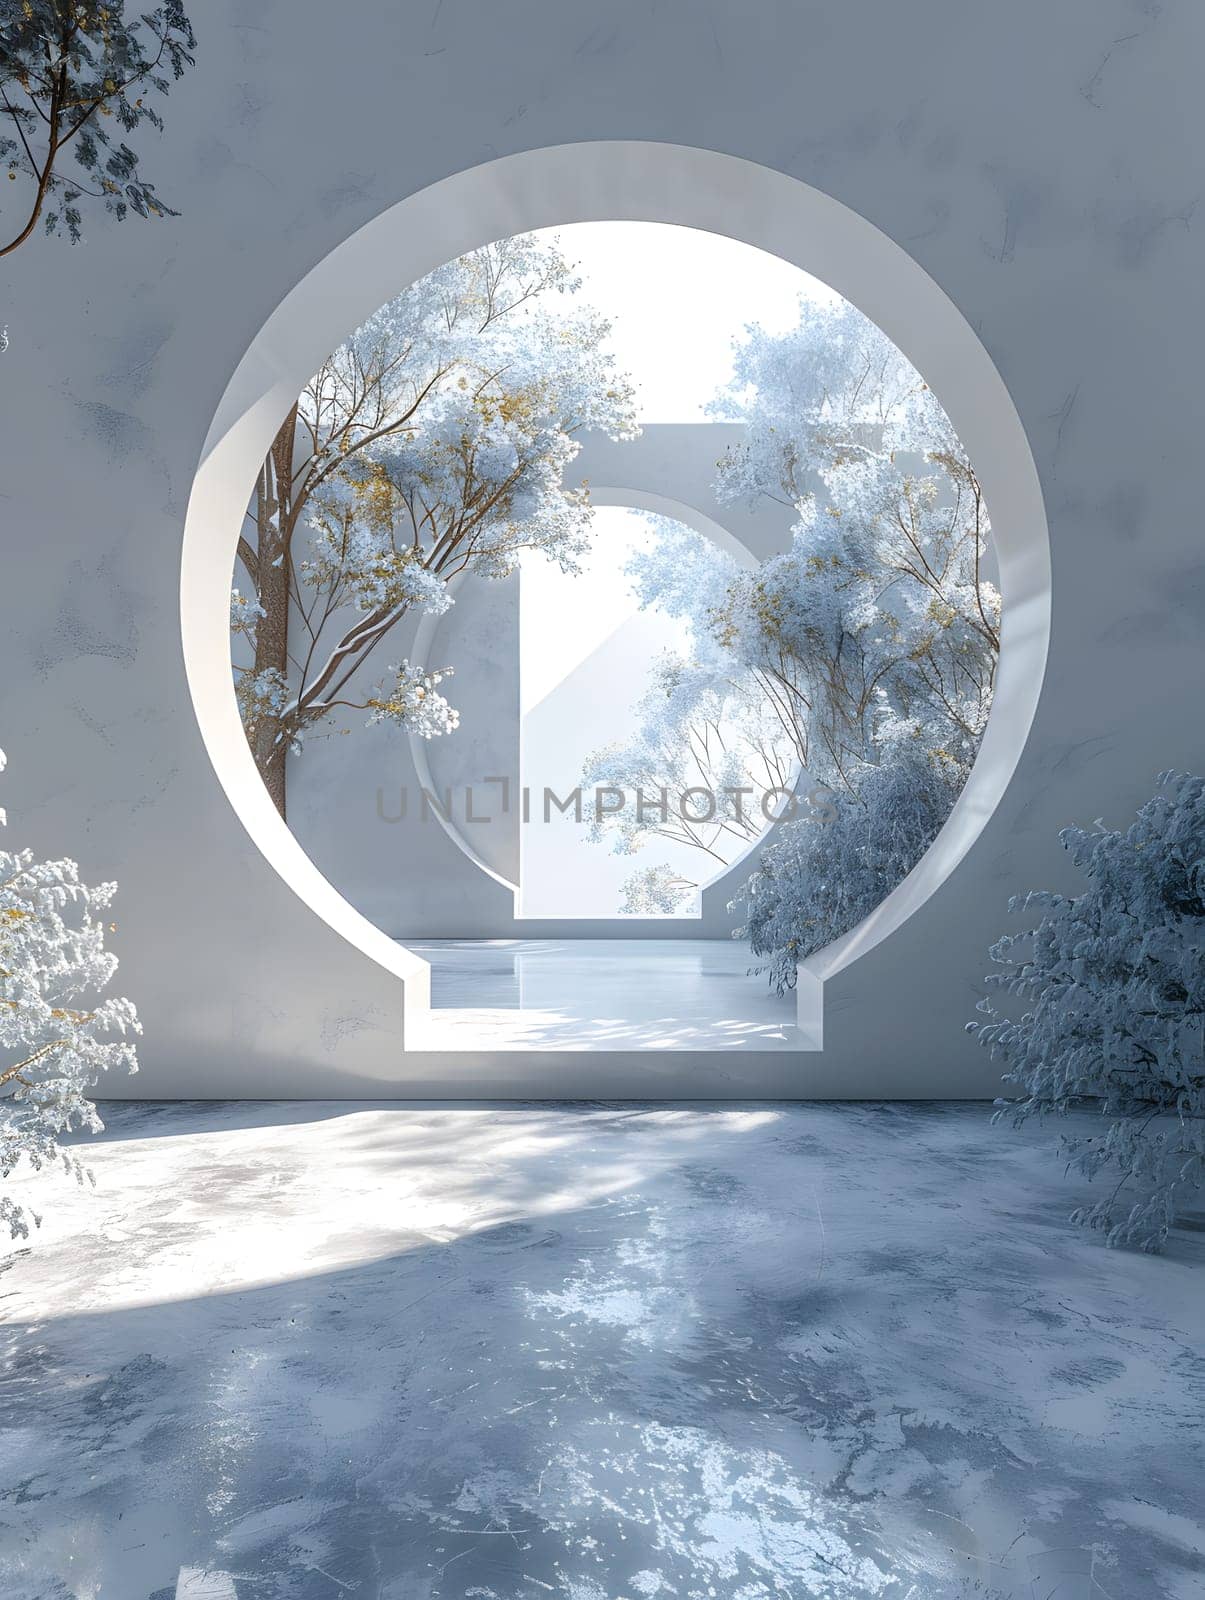 A room with a circular window overlooking snowy trees, creating a serene atmosphere. The reflection of the astronomical objects in the glass adds to the magical world outside